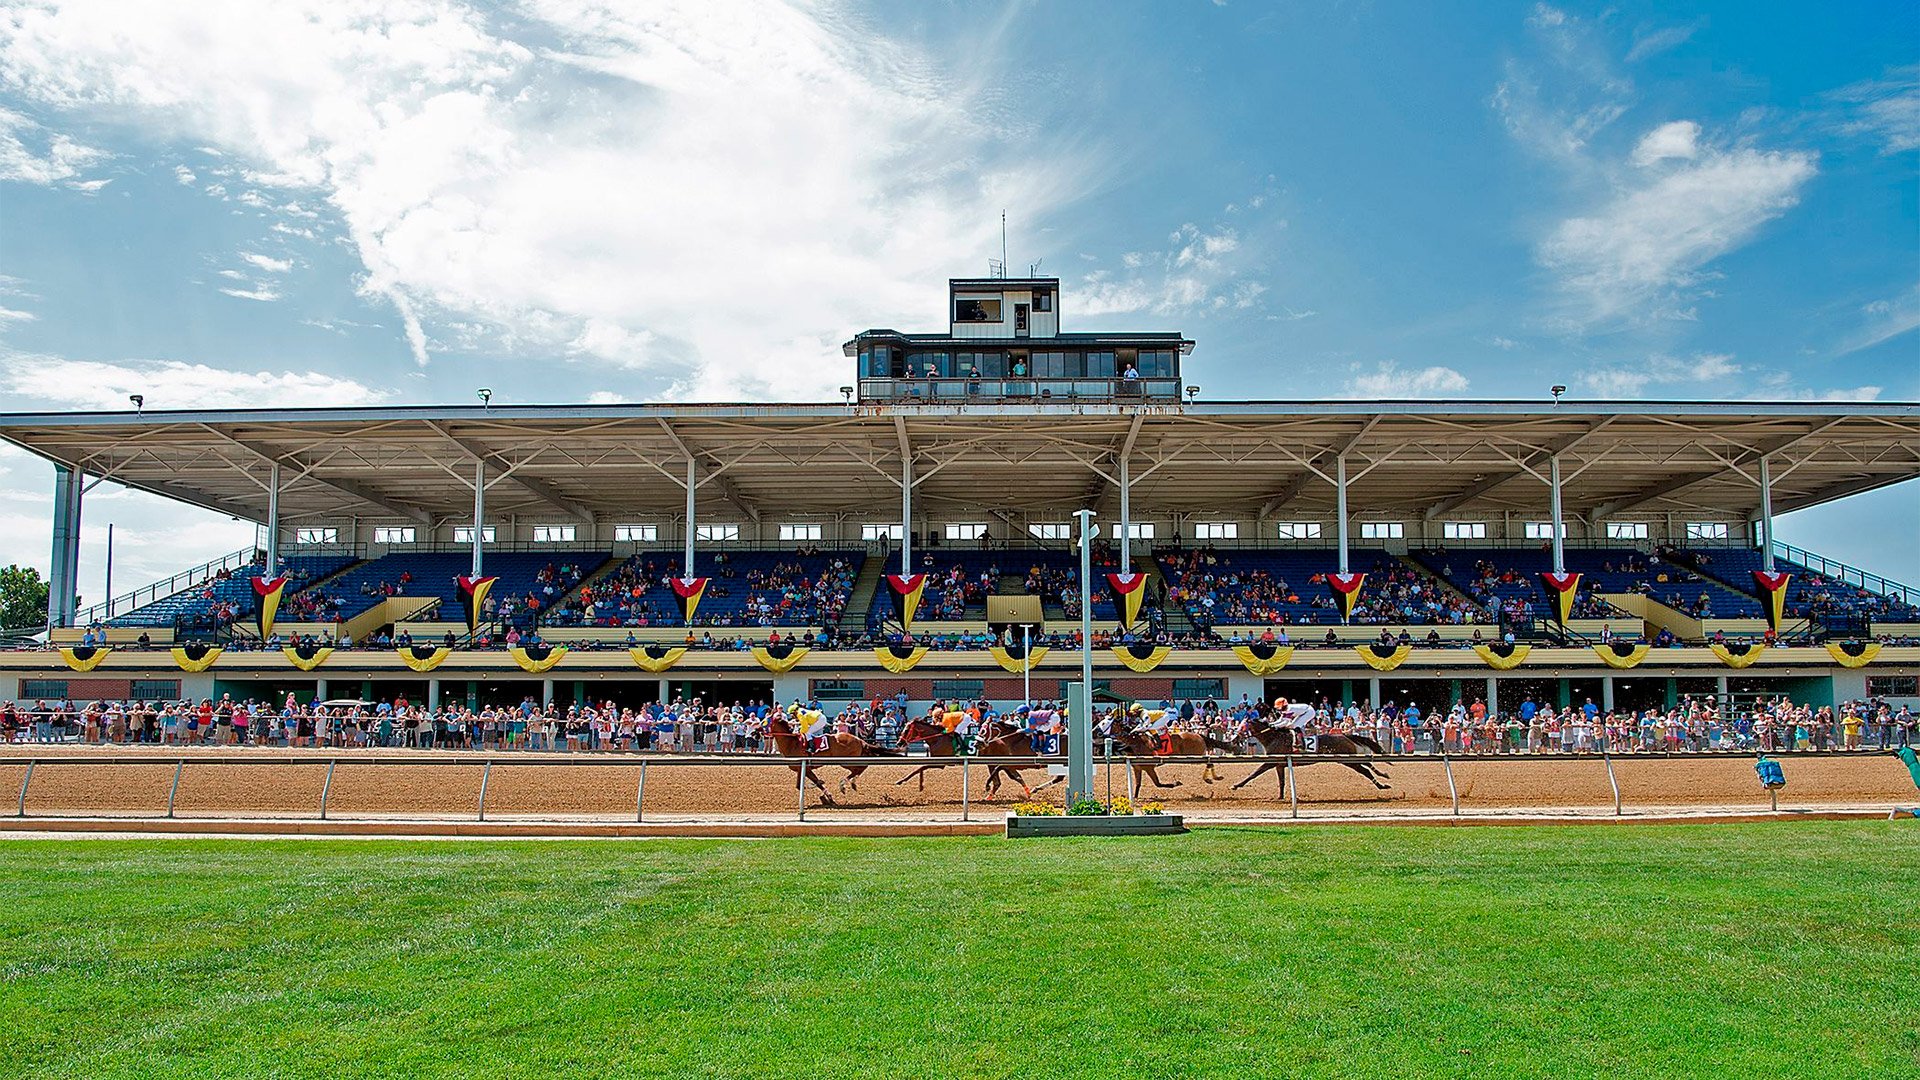 Maryland Lottery approves DraftKings’ application for a retail sportsbook at Timonium Racetrack